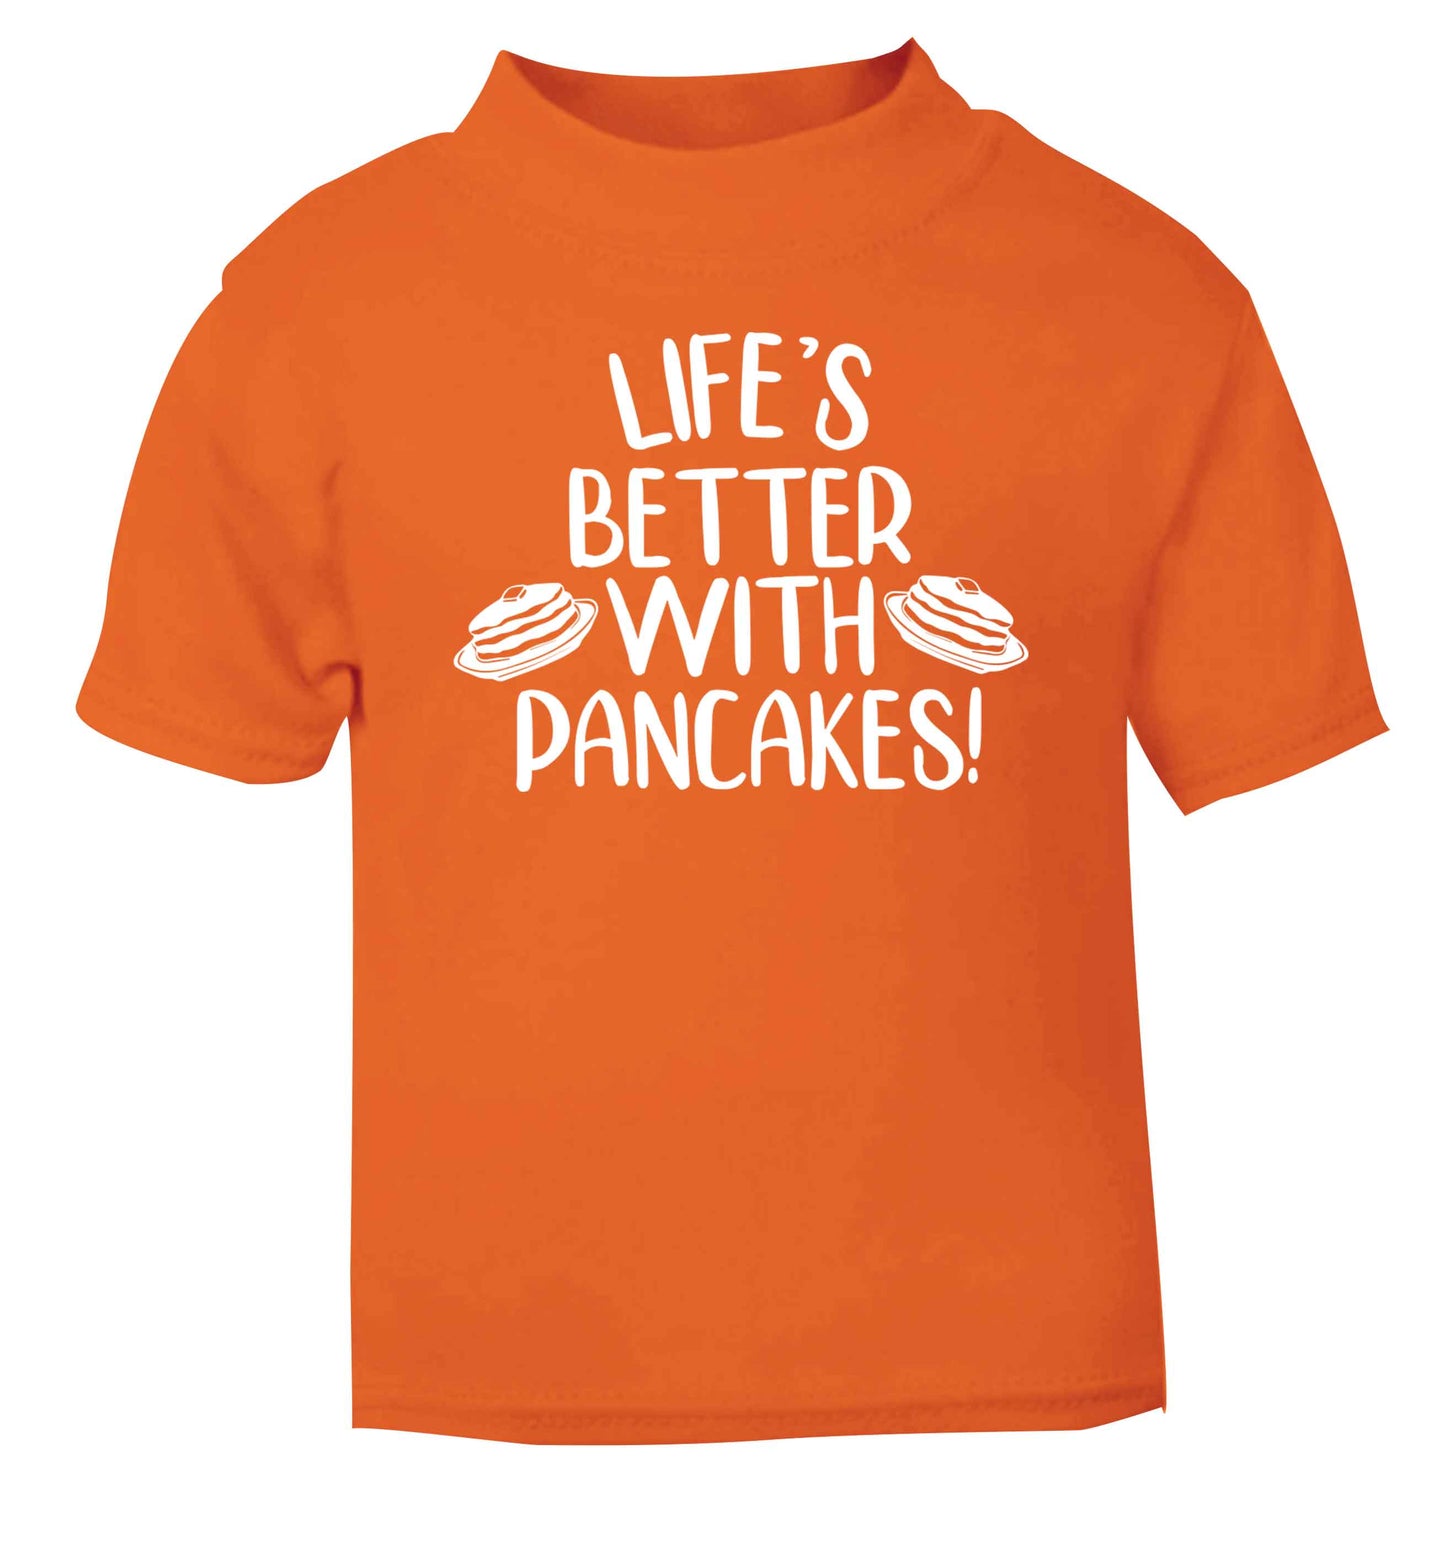 Life's better with pancakes orange baby toddler Tshirt 2 Years